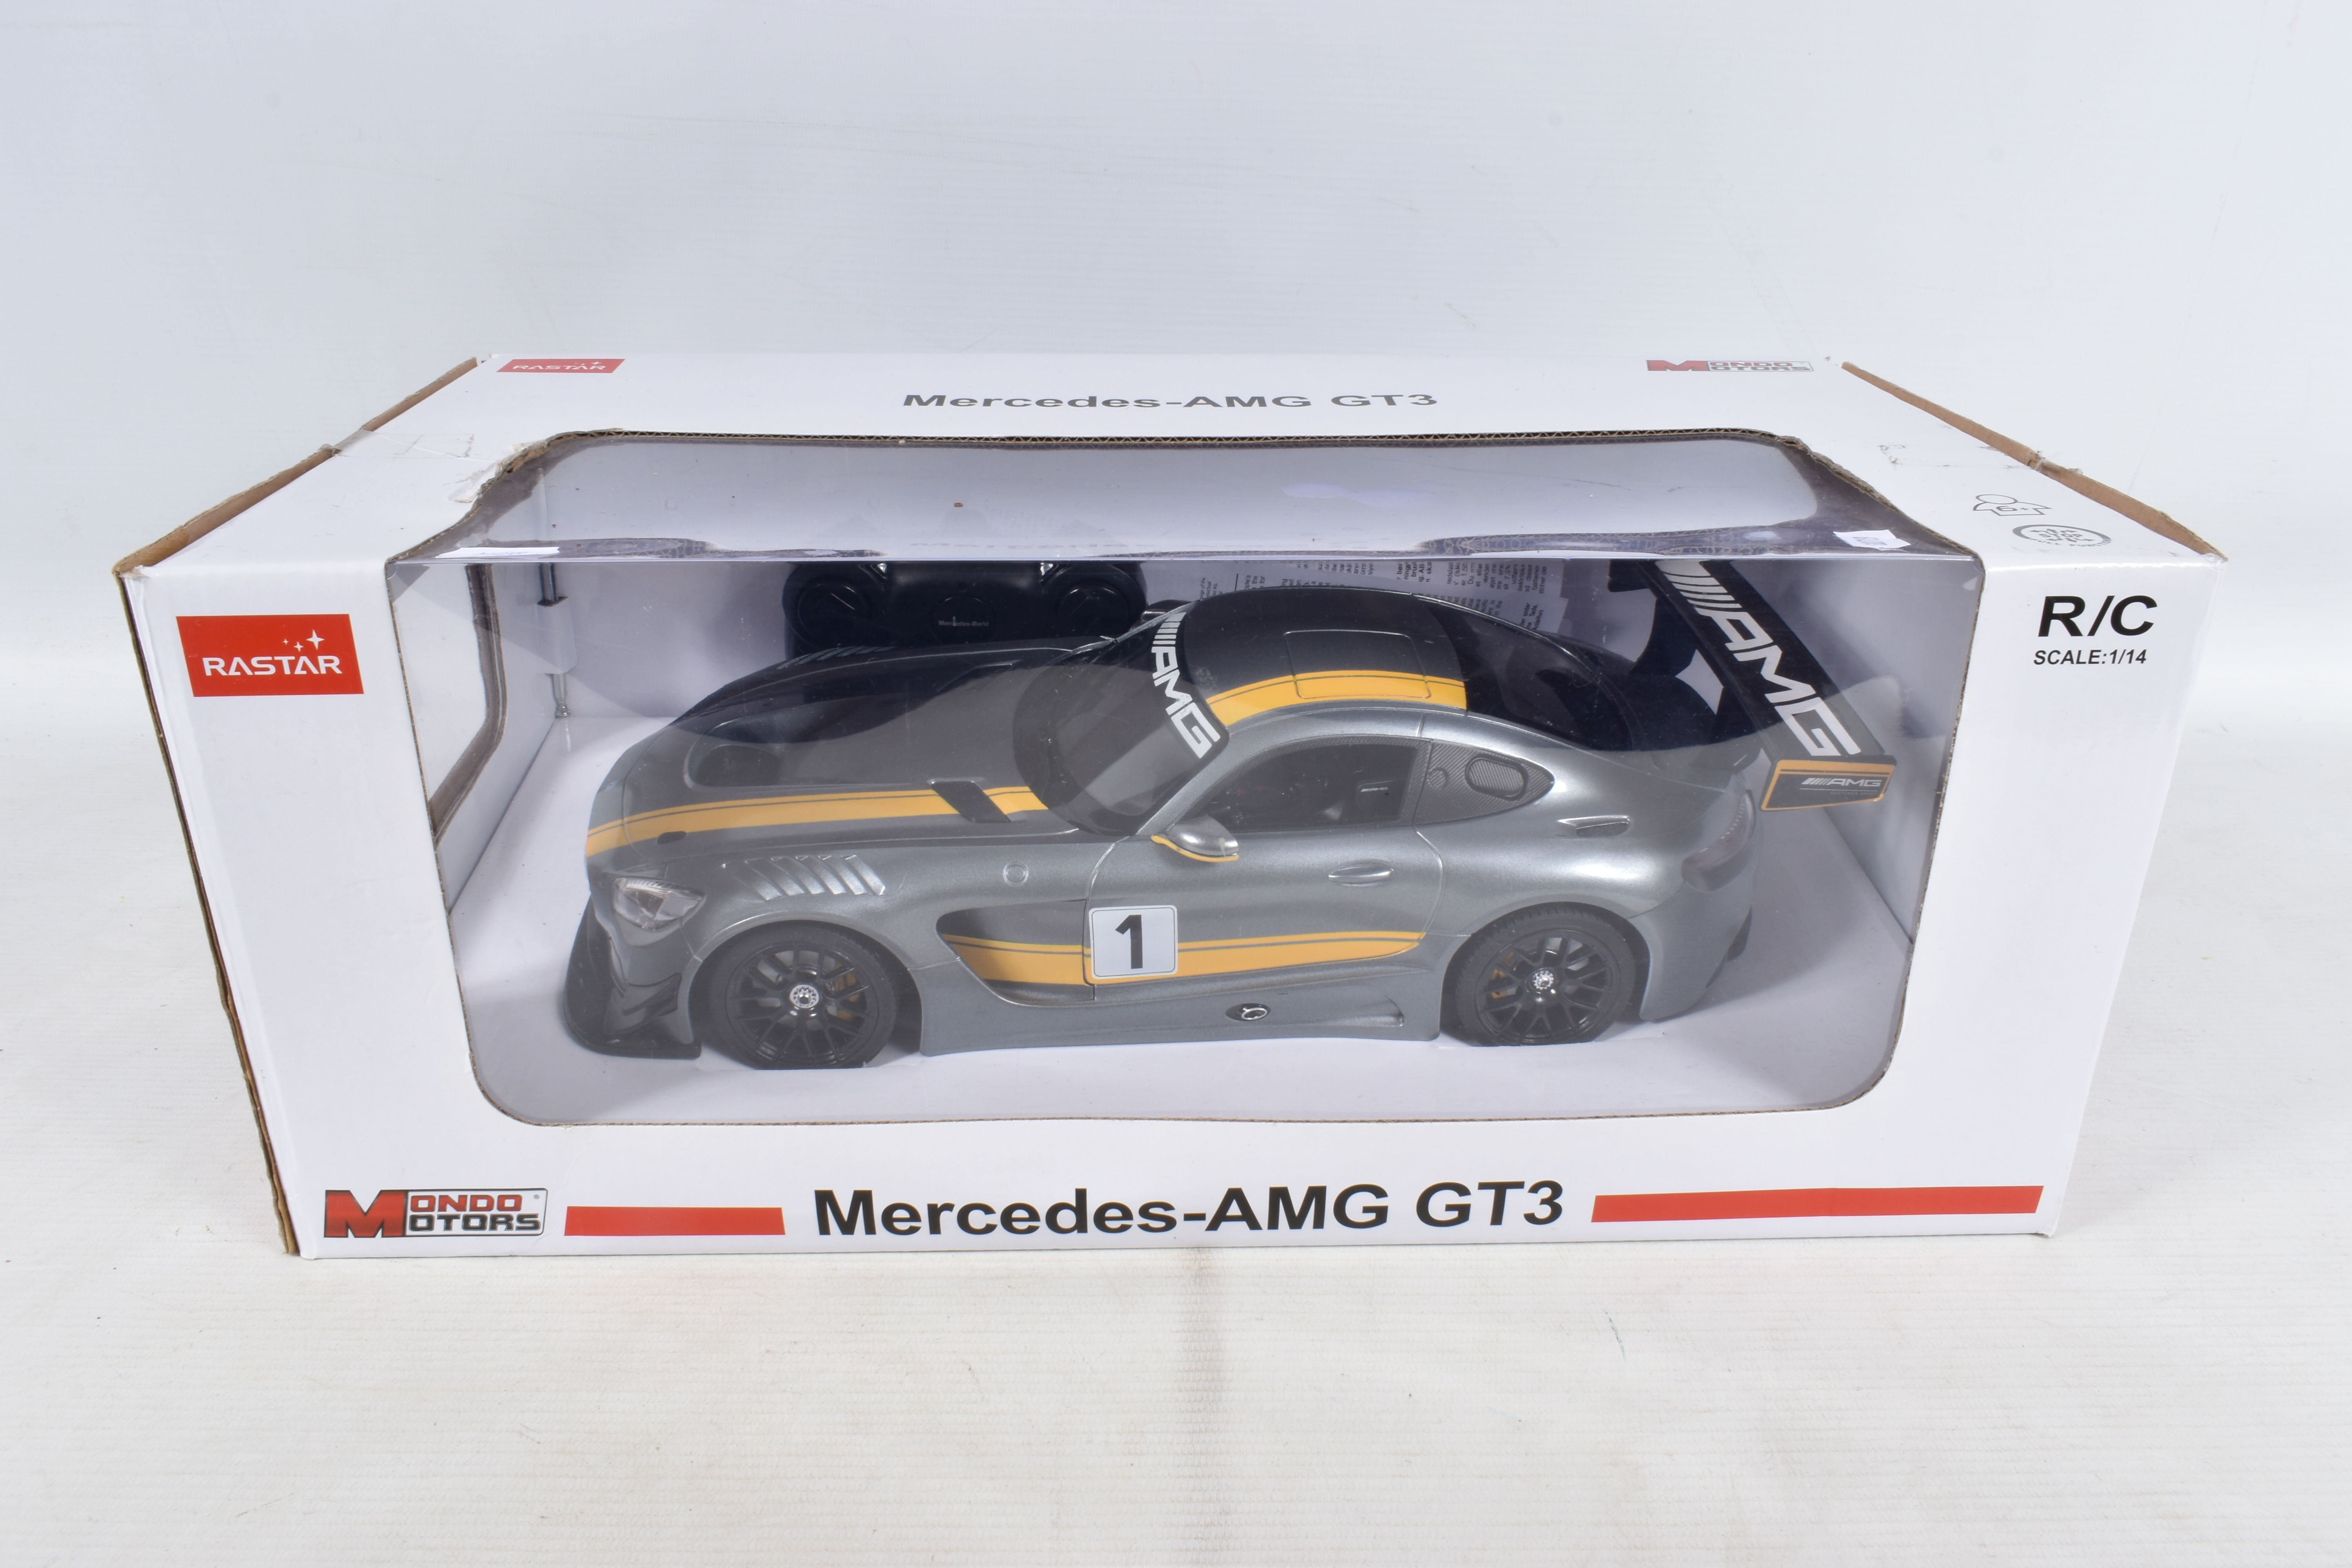 A BOXED RASTAR MONDO MOTORS RADIO CONTROL MERCEDES-AMG GT3 RACING CAR, 1/14 scale, not tested but - Image 4 of 16